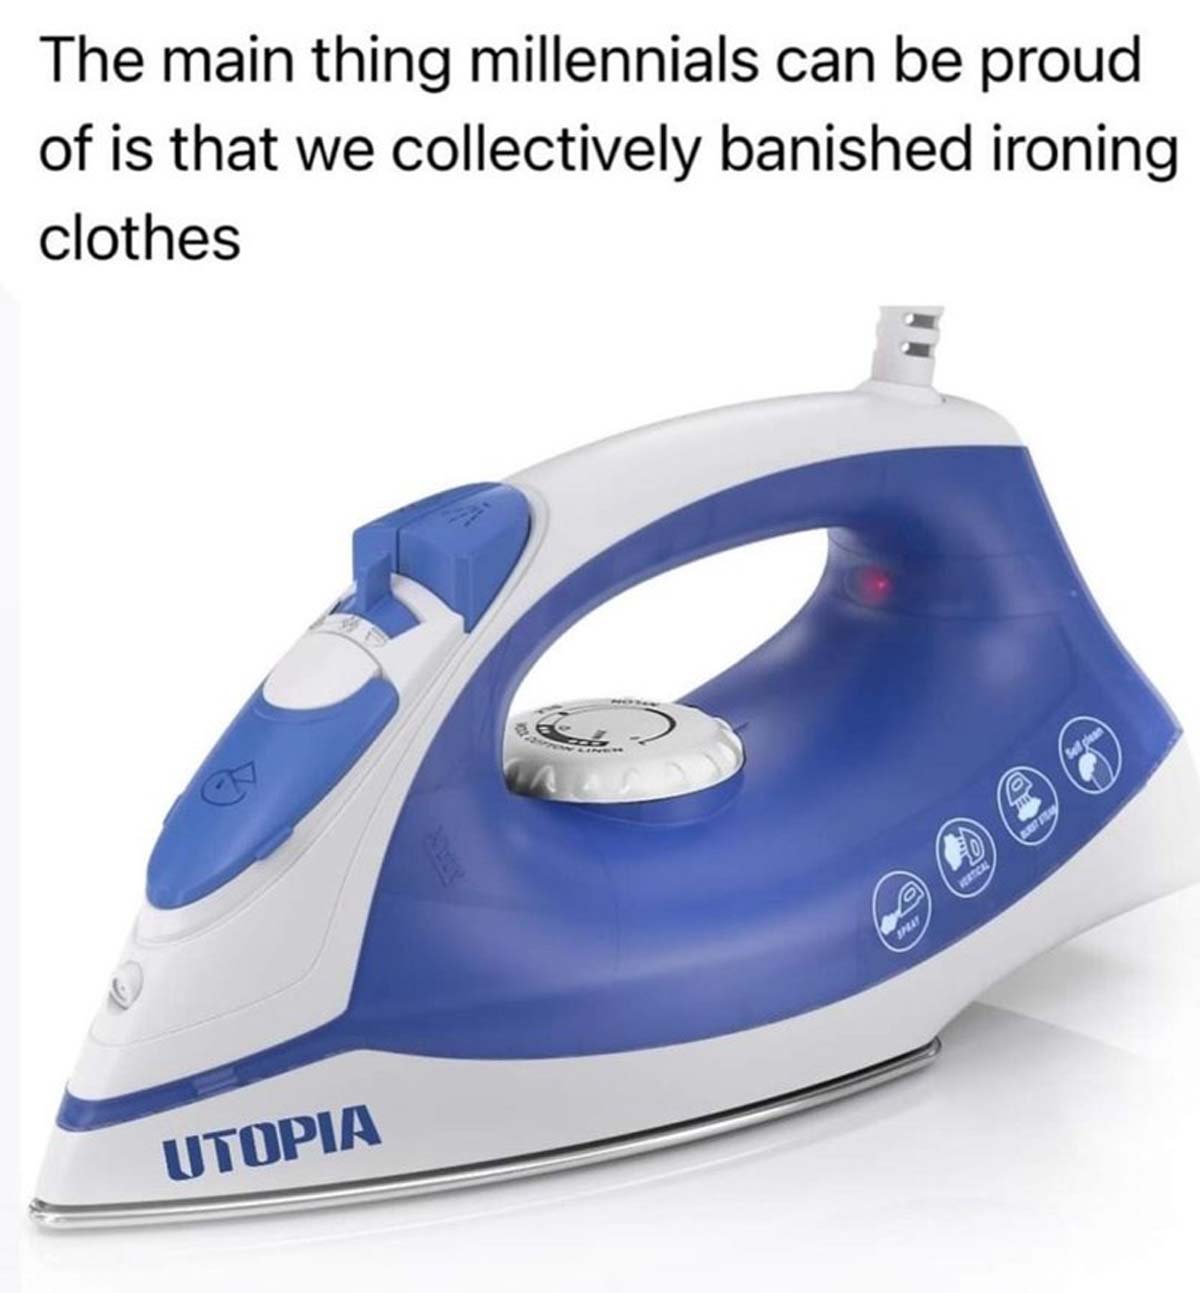 clothing iron - Utopia The main thing millennials can be proud of is that we collectively banished ironing clothes Vertical Sell glean